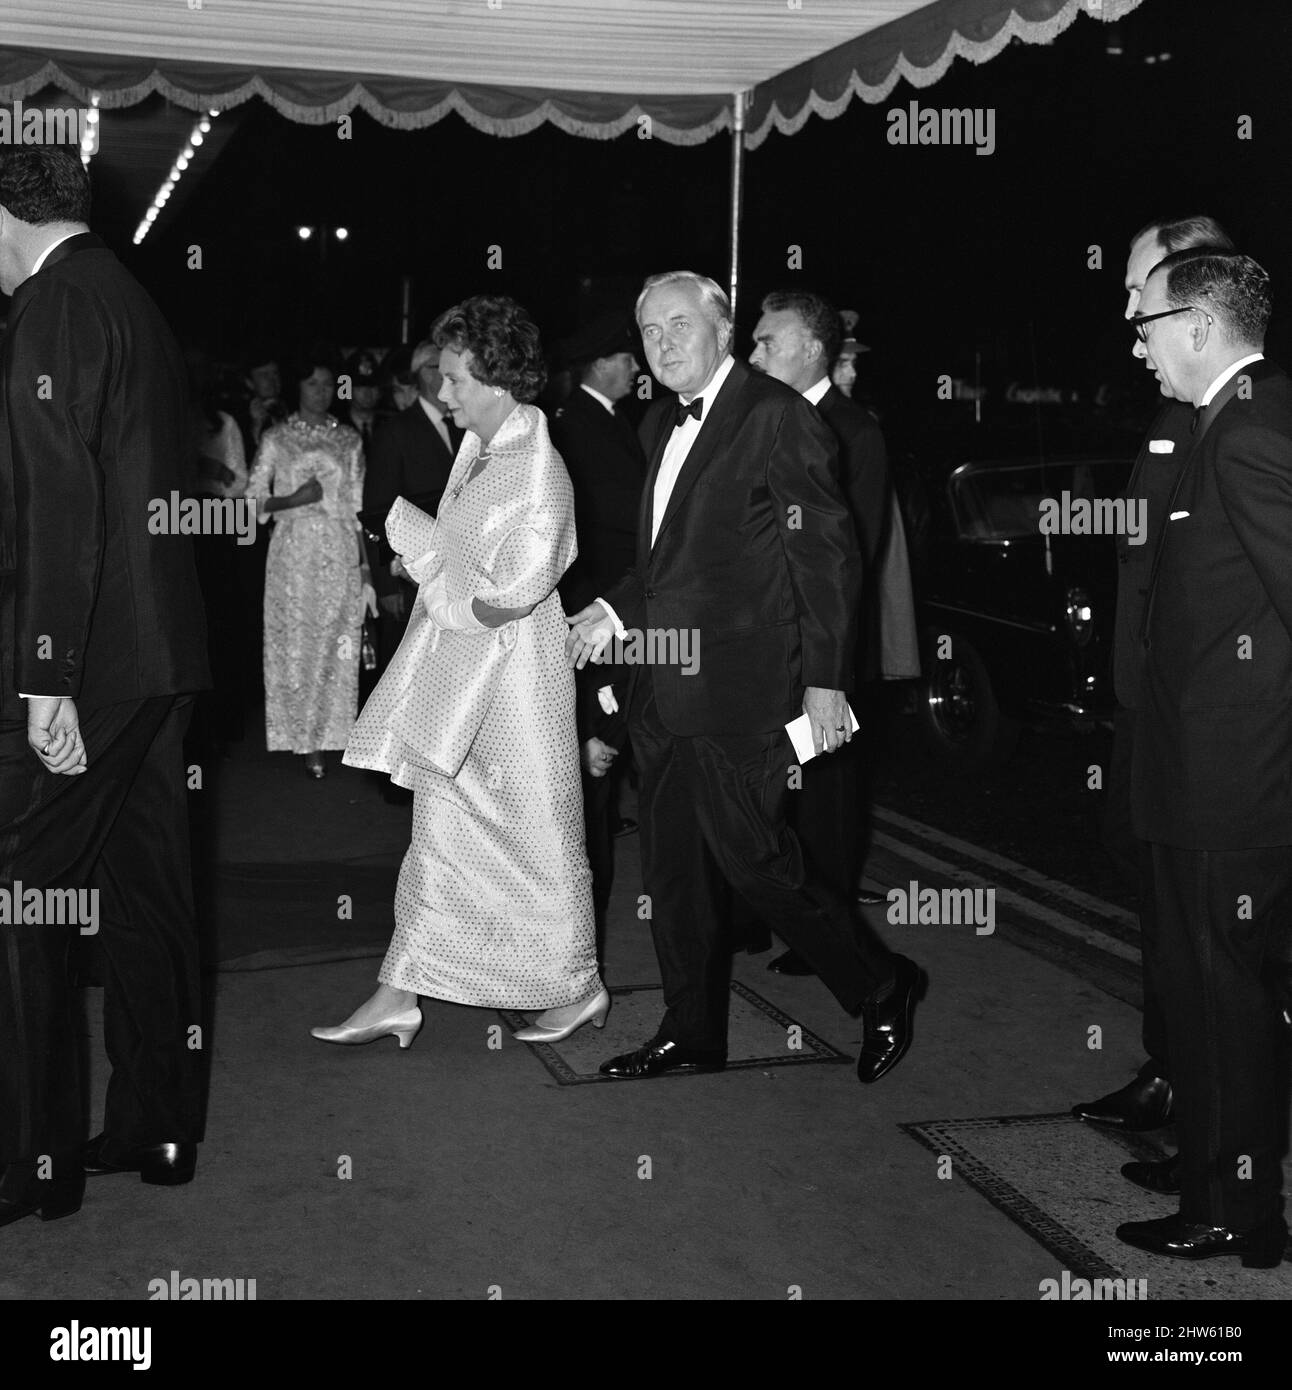 The Royal Charity Premier of 'Oliver!' in the presence of HRH Princess Margaret and Lord Snowdon, in aid of the NSPCC, sponsored by the Variety Club. Prime minister Harold Wilson arrives at the premier with Mrs Wilson. Odeon Theatre, Leicester Square. 26th September 1968. Stock Photo